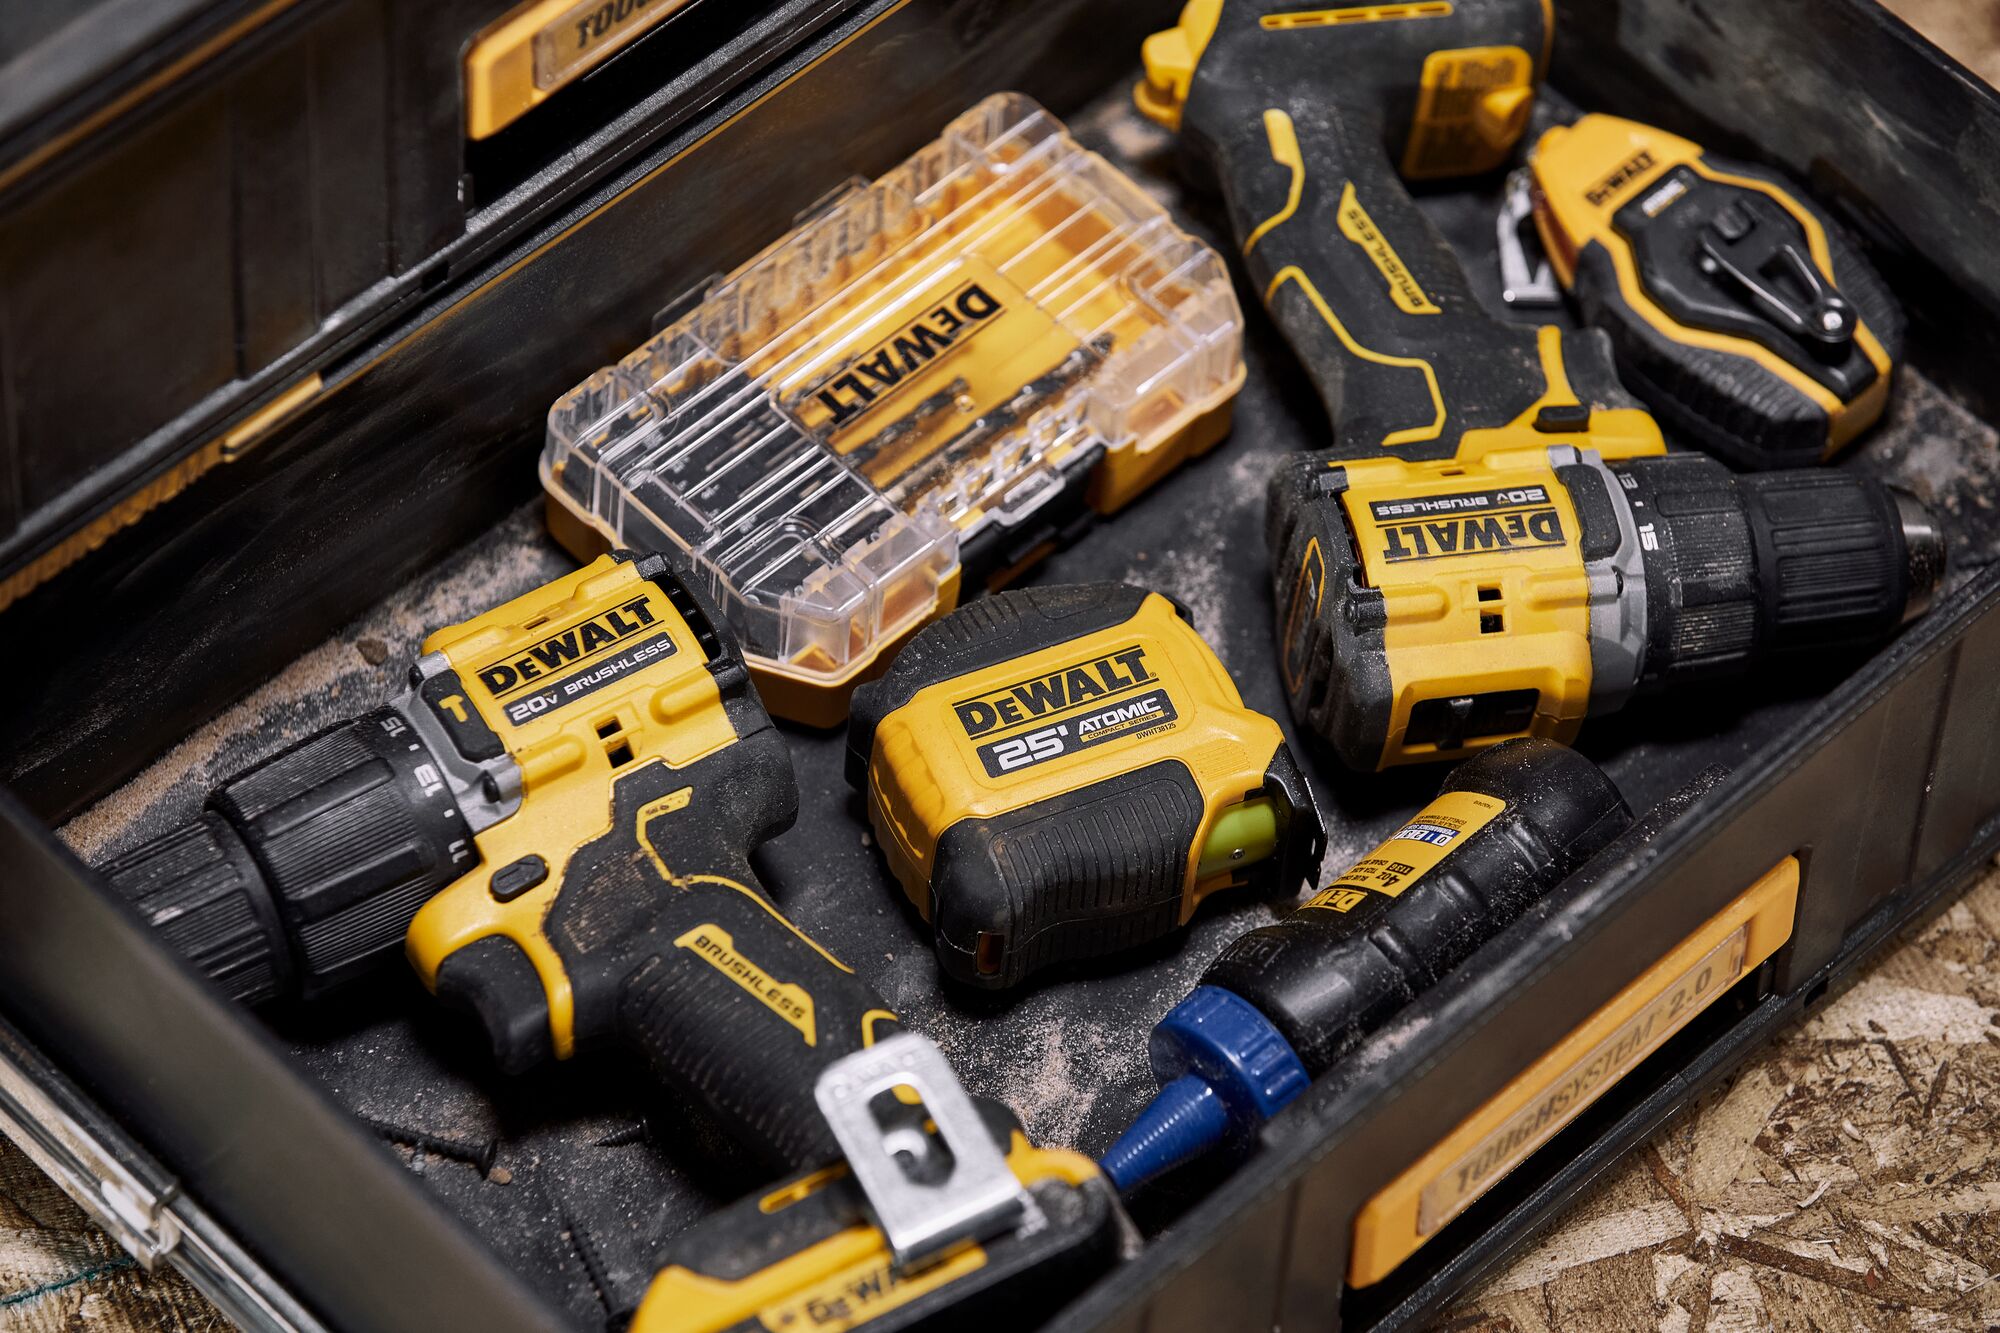 Group shot of 20V MAX drills with Tough System(®) tool box and ATOMIC tape measure close up